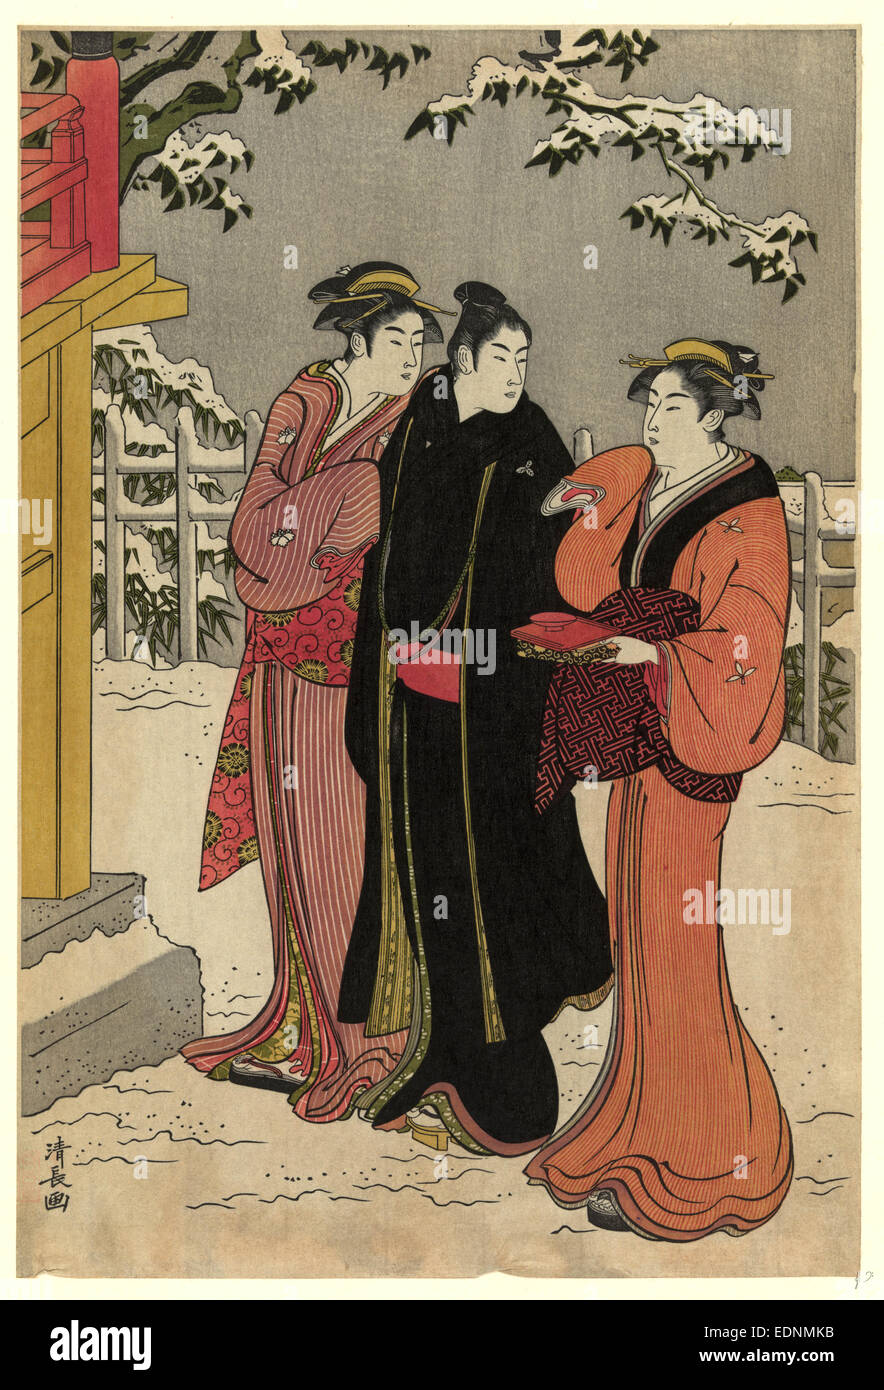 Matsuchiyama no yukimi, Viewing snow at Mount Matchi., Torii, Kiyonaga, 1752-1815, artist, [1784, printed later], 1 print : woodcut, color., Print shows a man and two women standing in the snow outside a shrine, one woman carries an offering. Stock Photo